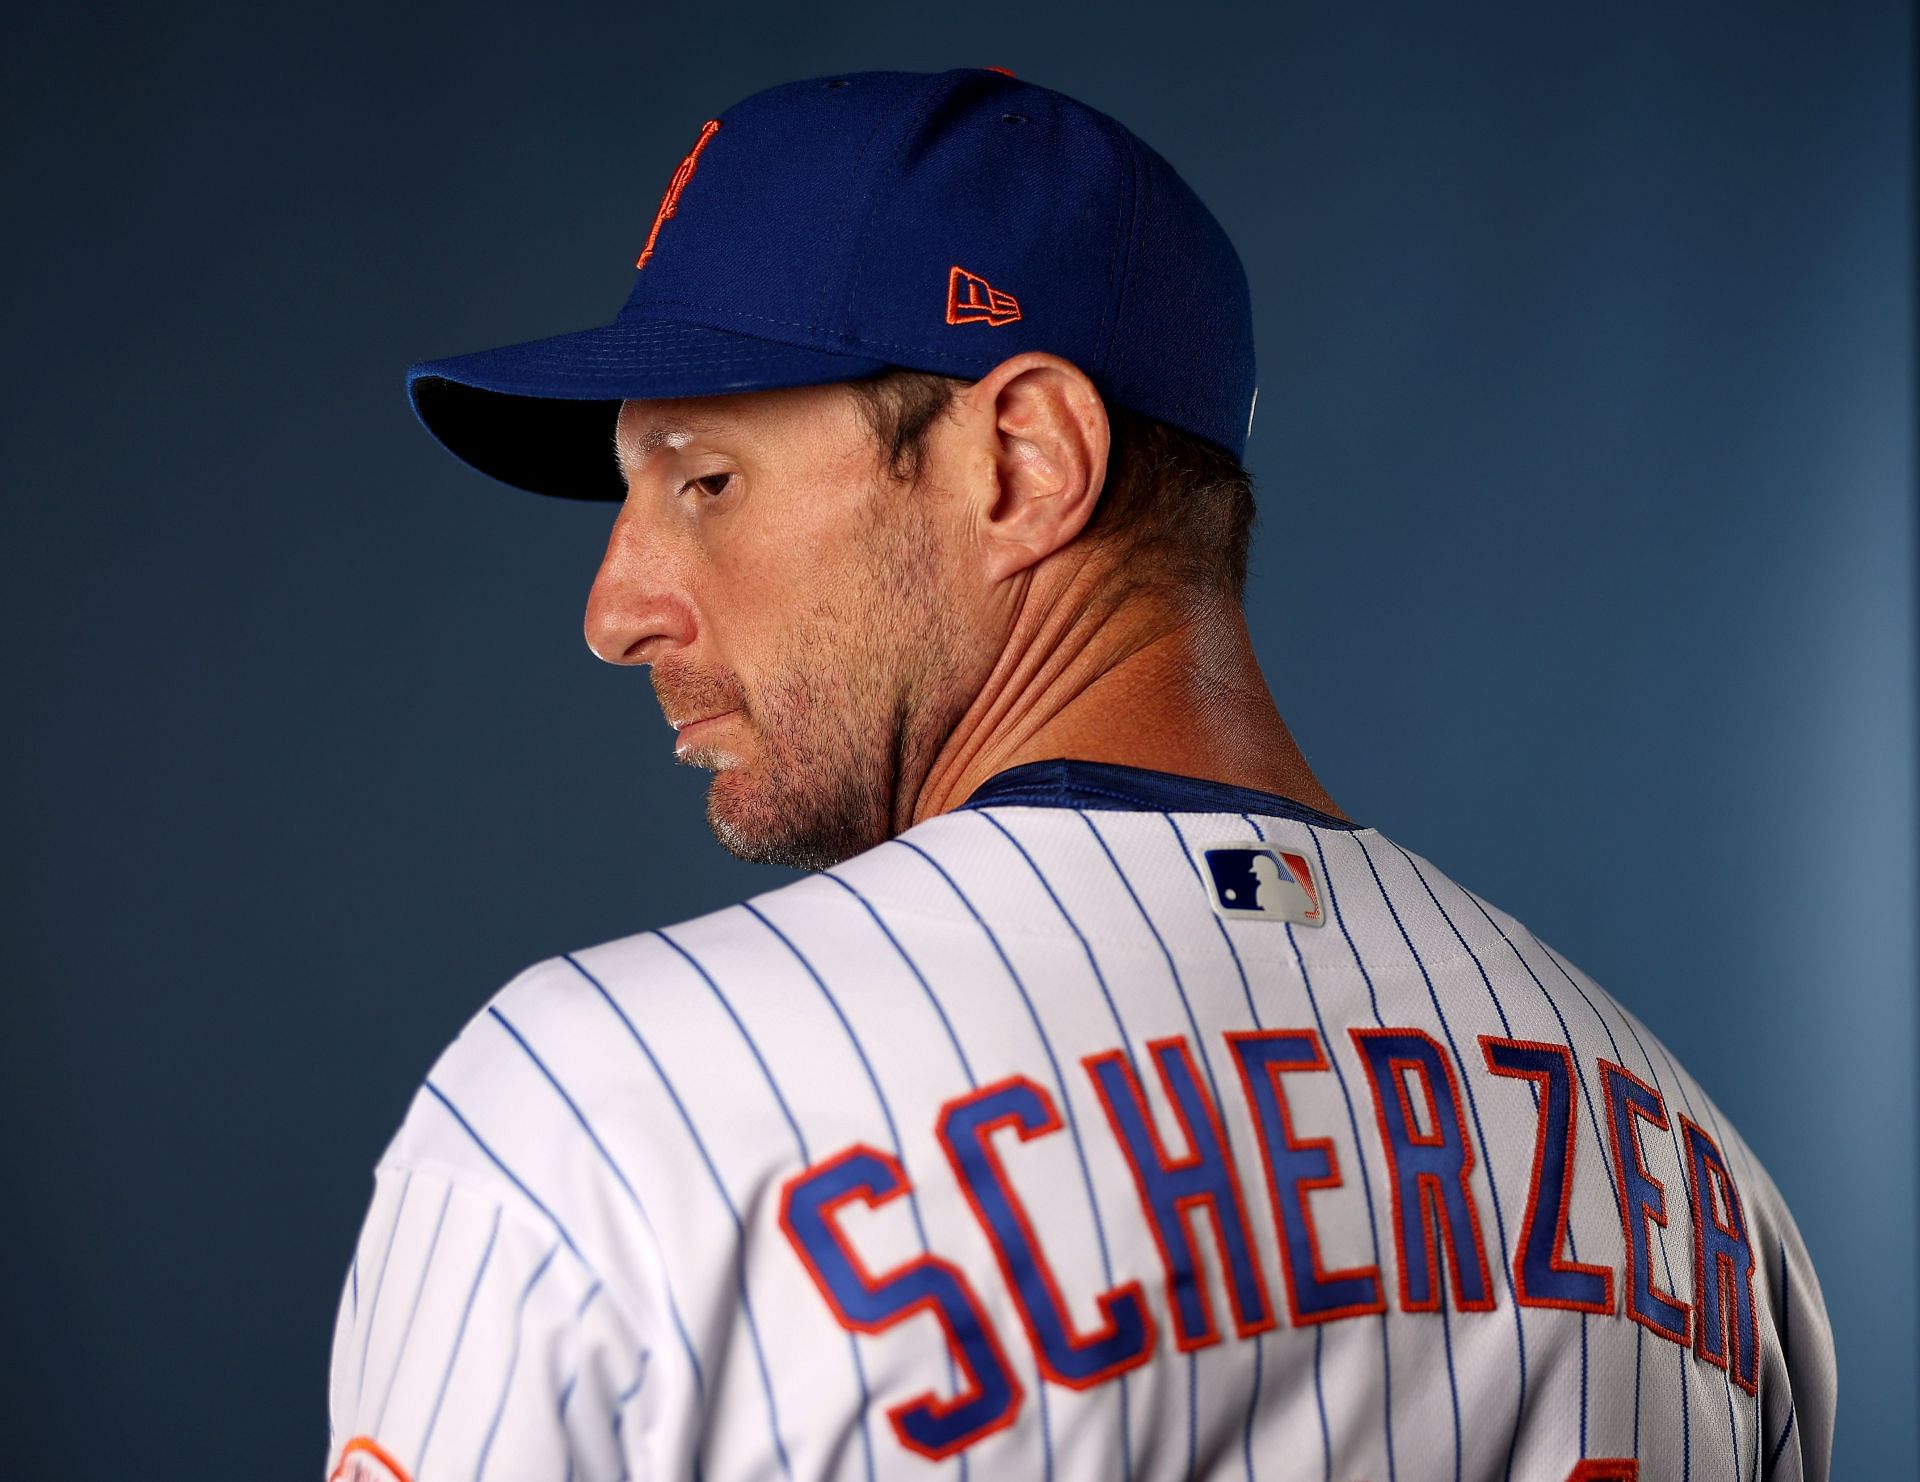 New York Mets fans frustrated as Max Scherzer walks off the mound to a  chorus of boos after giving up 6 runs in 3.1 innings pitched: As he should